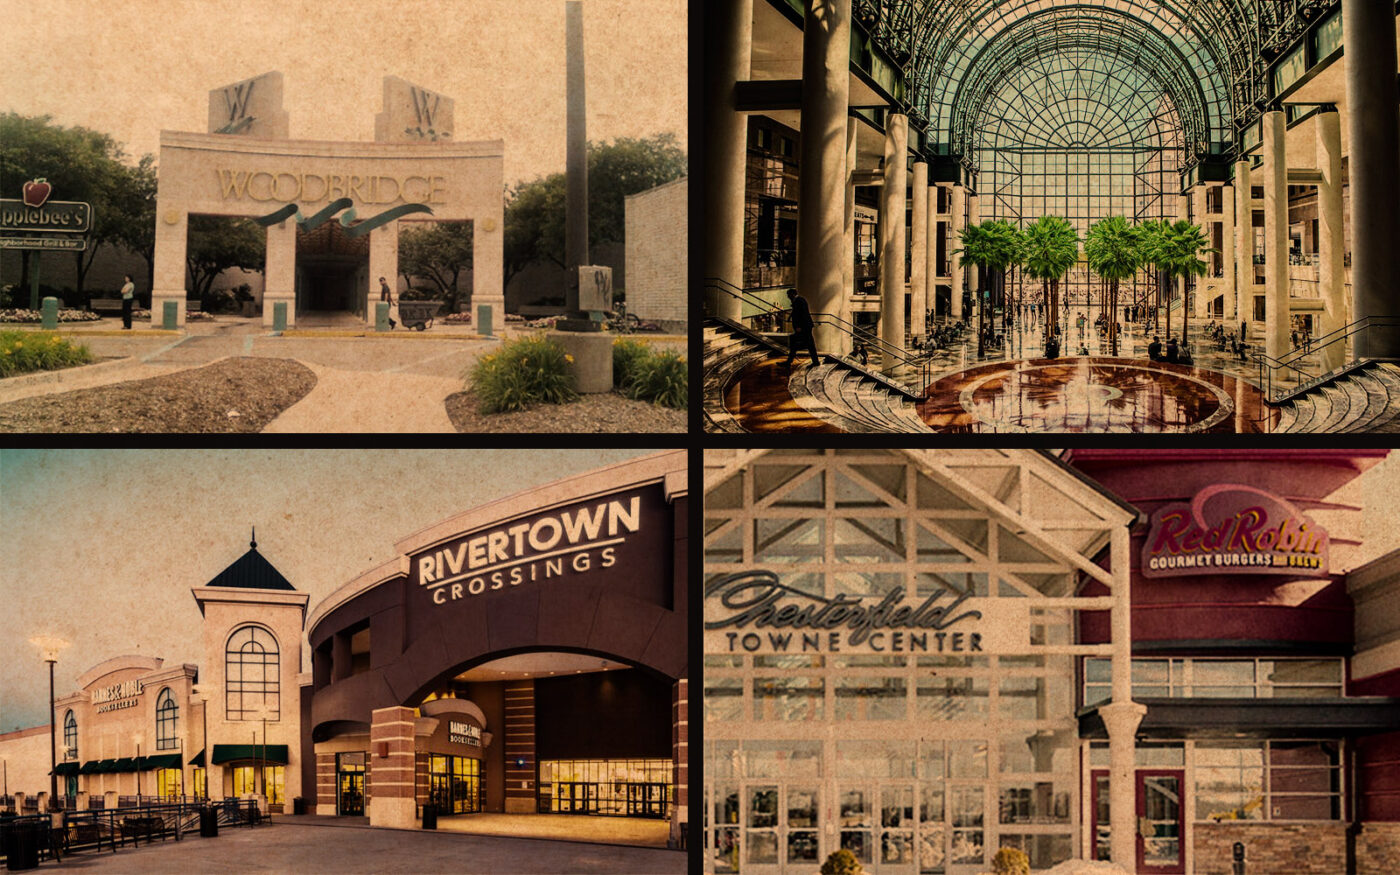 (clockwise from top-left) Woodbridge Center in North Jersey, Lower Manhattan’s Brookfield Place, Virginia’s Chesterfield Town Center and Michigan’s RiverTown Crossings (Getty, TripAdvisor, Rivertown Crossings, Chesterfield Town Center, TopGear/Public domain/via Wikimedia Commons)